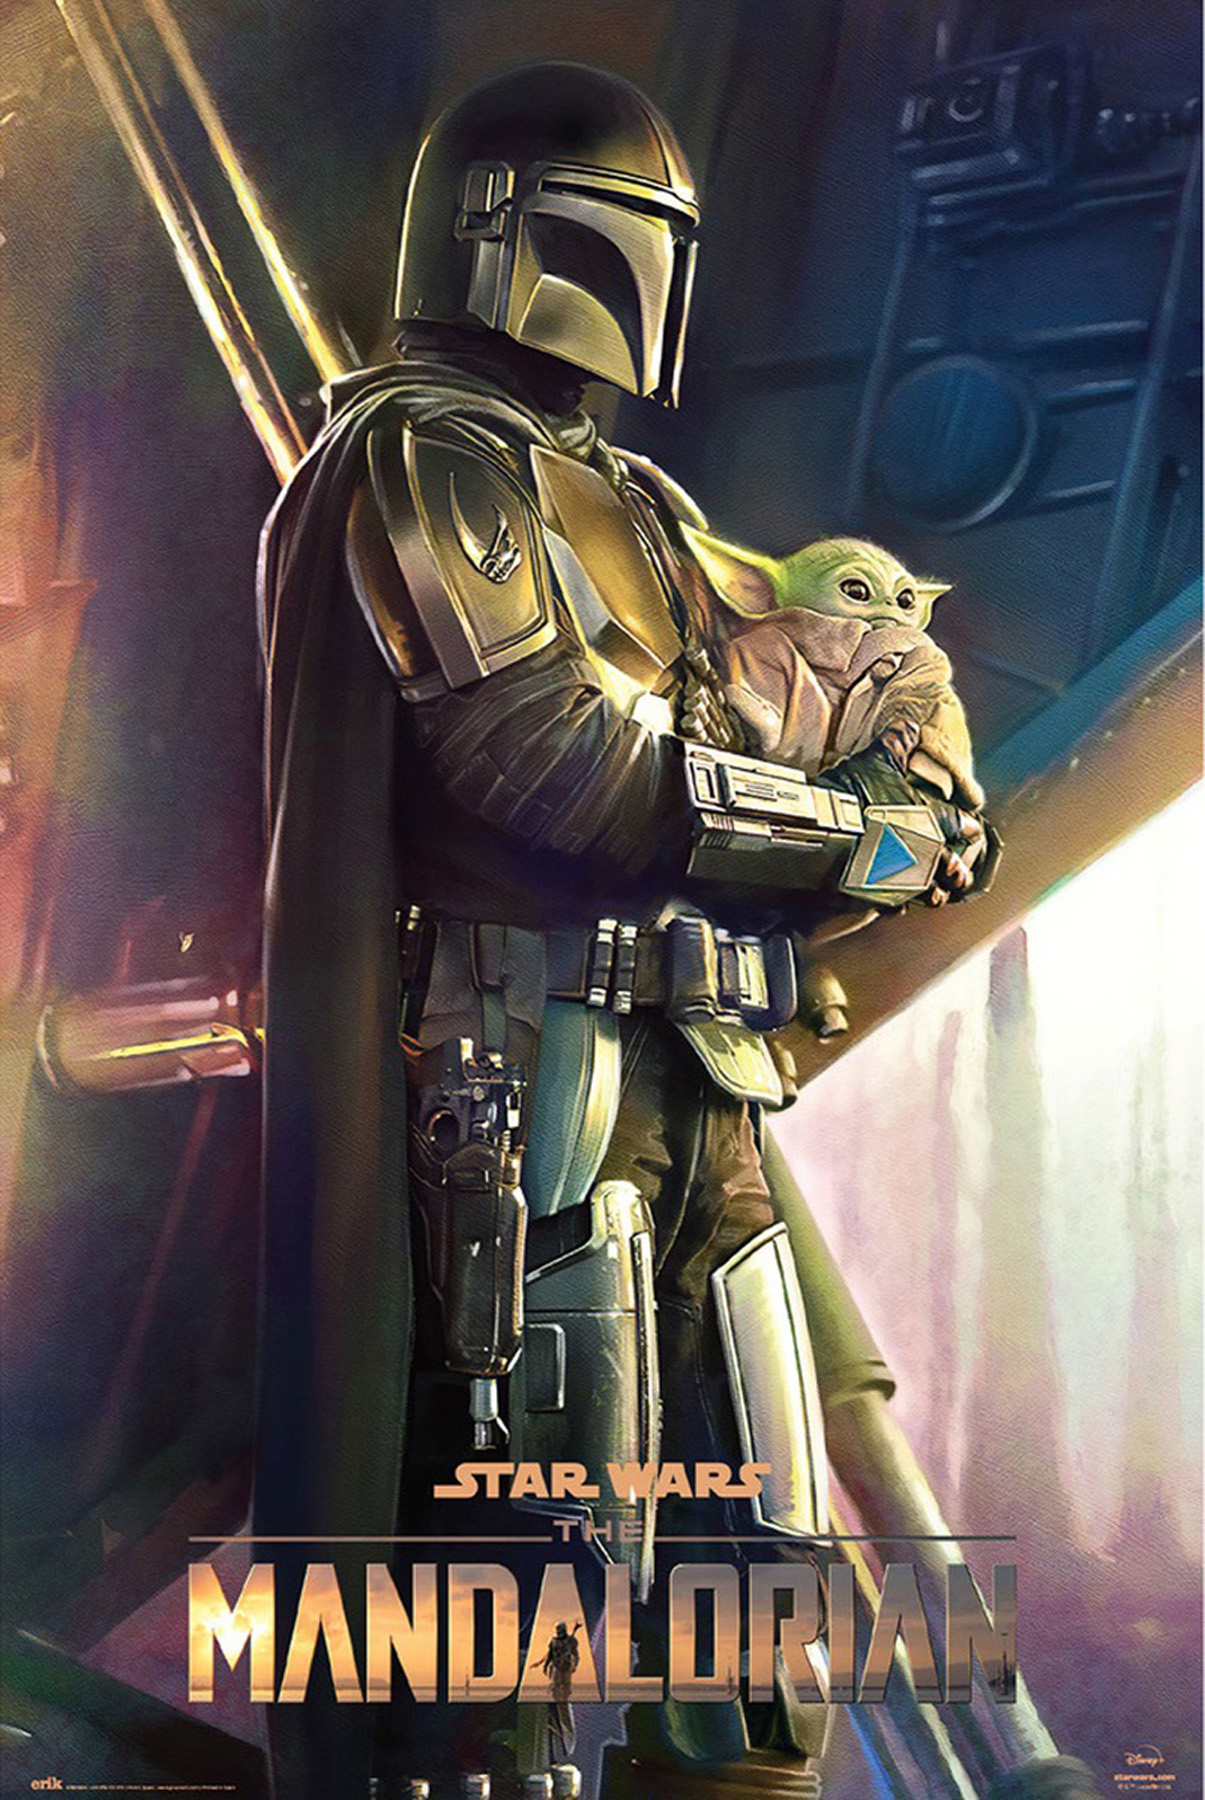 Mandalorian Star Clan - - of The Wars two